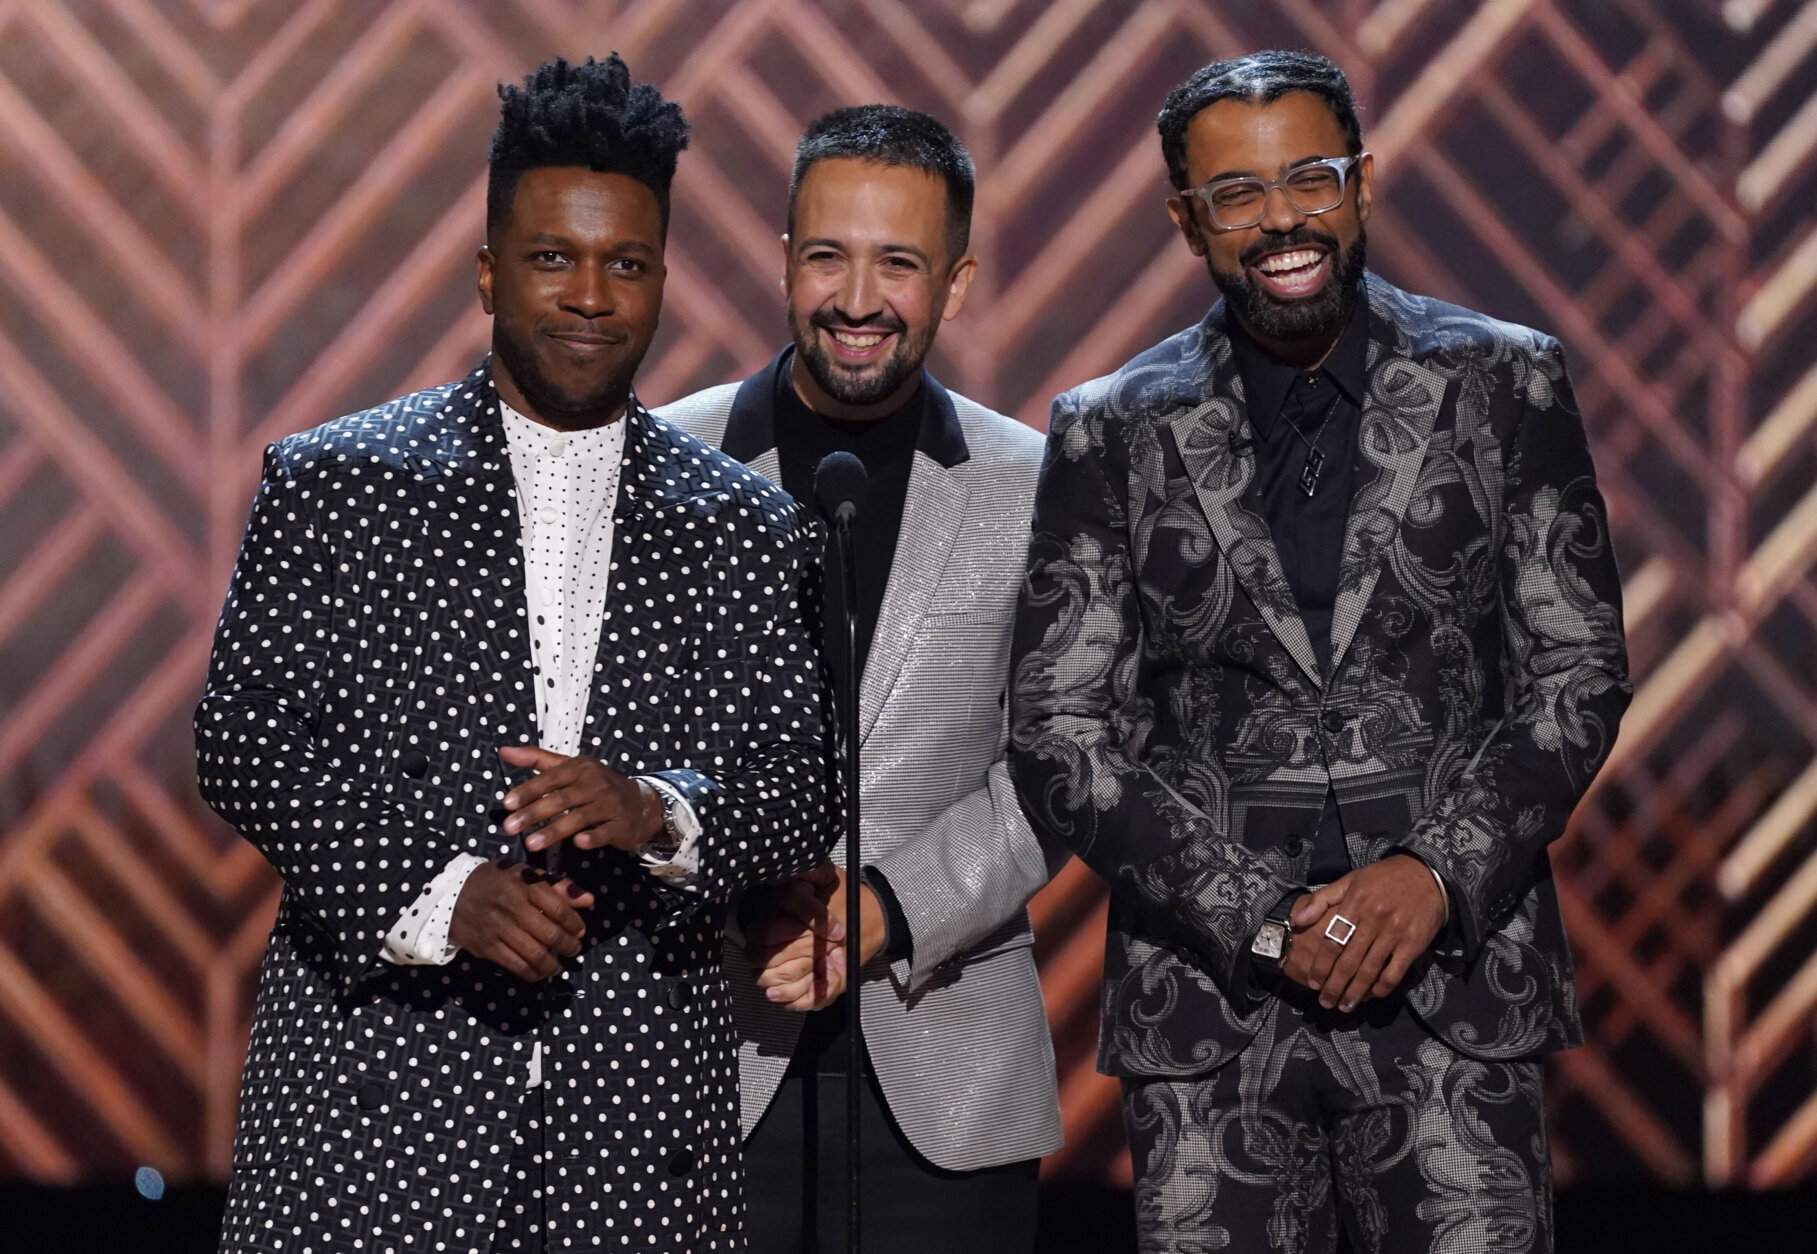 Leslie Odom Jr., from left, Lin-Manuel Miranda and Daveed Diggs speak at the 28th annual Screen Actors Guild Awards at the Barker Hangar on Sunday, Feb. 27, 2022, in Santa Monica, Calif. (AP Photo/Chris Pizzello)